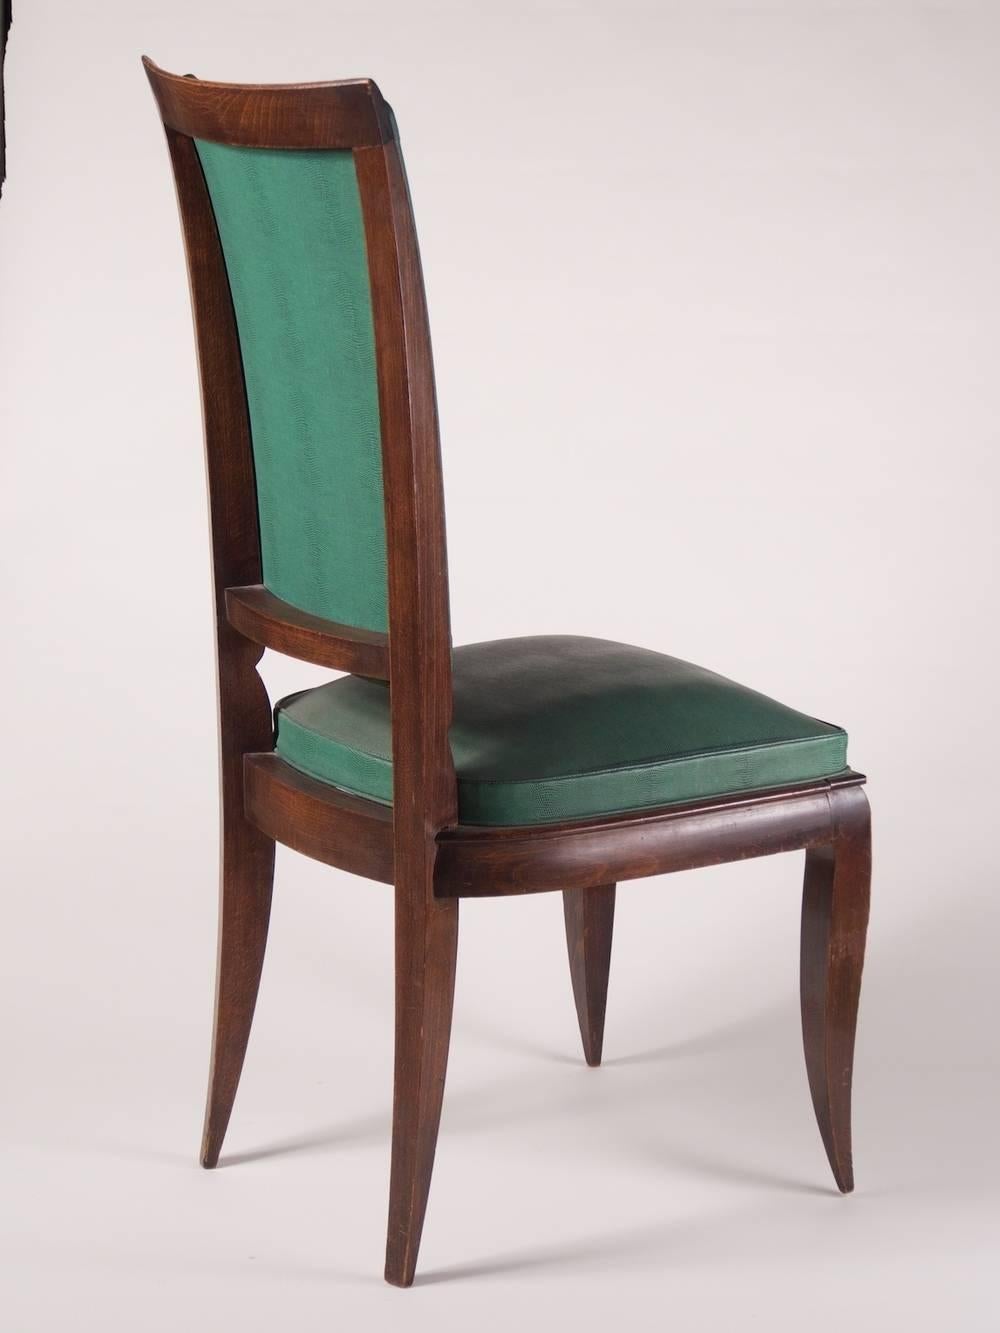 French 1940s Art Deco dining chairs, set of six by Rene Prou, in stained beech. These chairs could be ebonized.

Please note these chairs are unrestored in the photographs.

**PRICE includes proper restoration, refinishing and reupholstering with